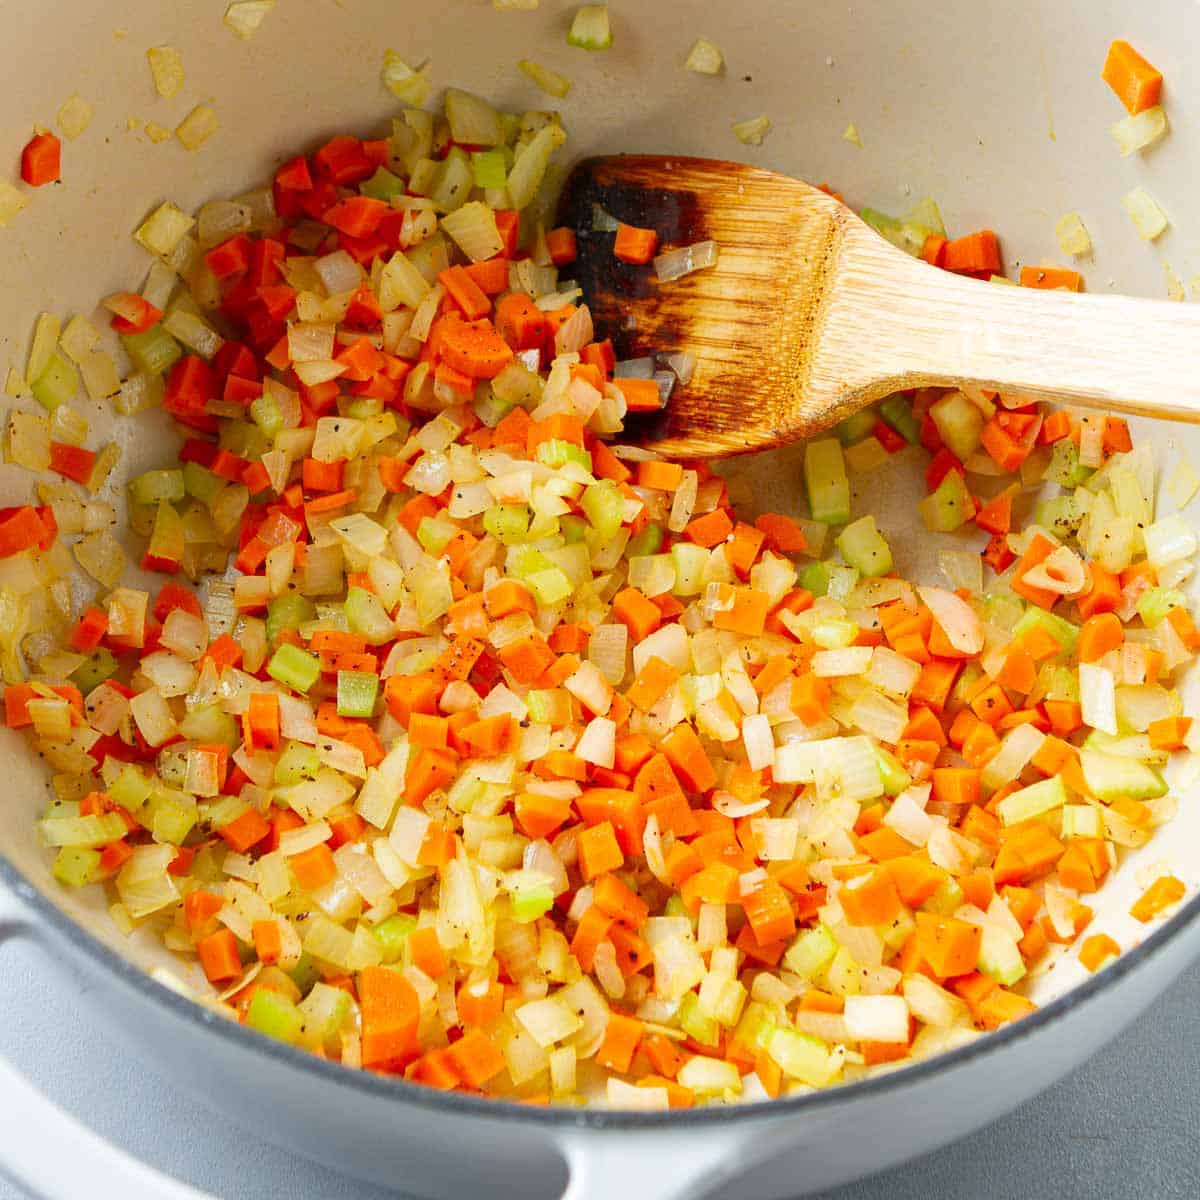 Chopped carrots, celery and onion in a large saucepan.